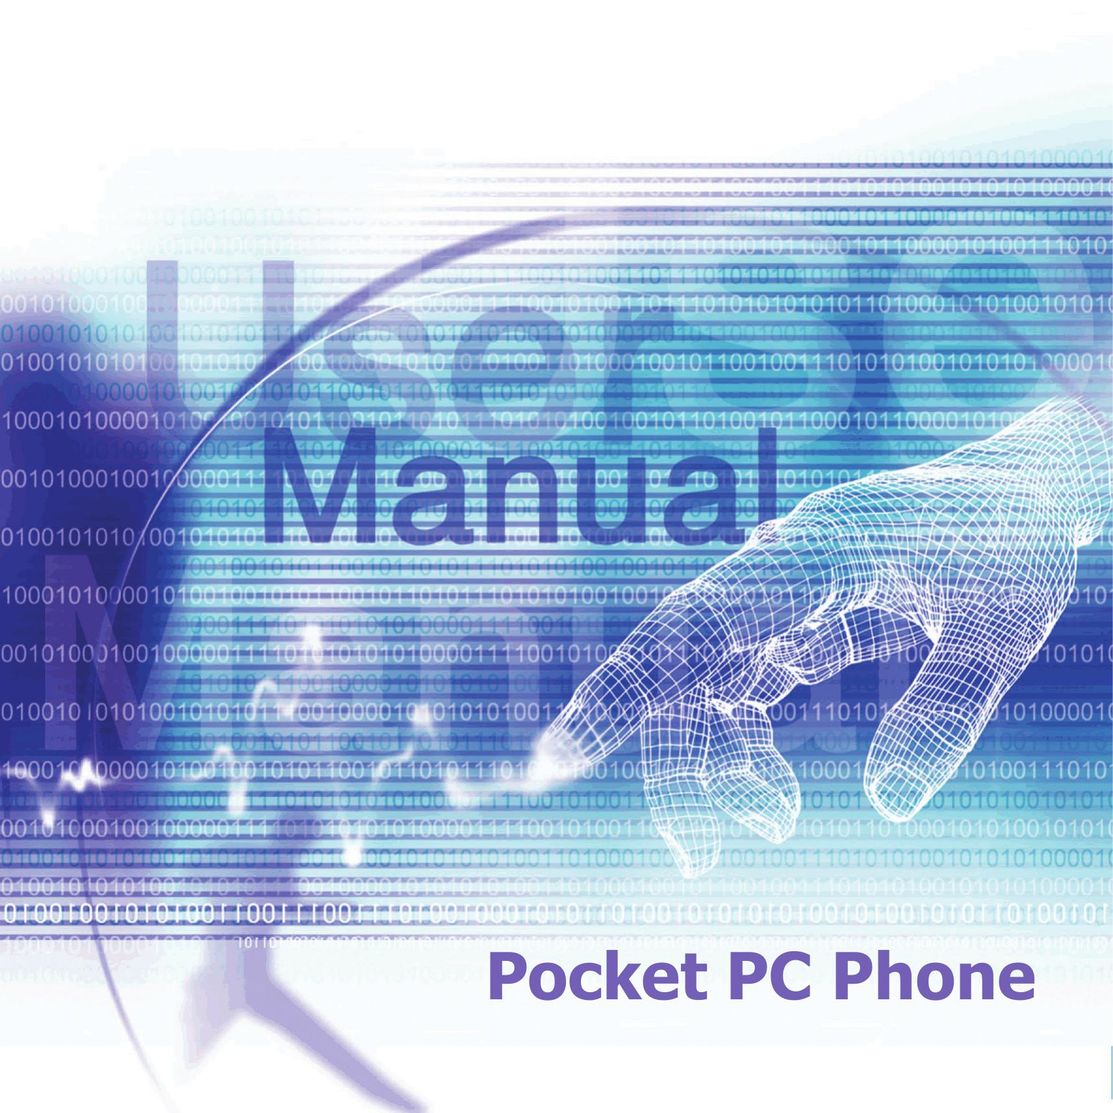 i-mate PM10A Cell Phone User Manual